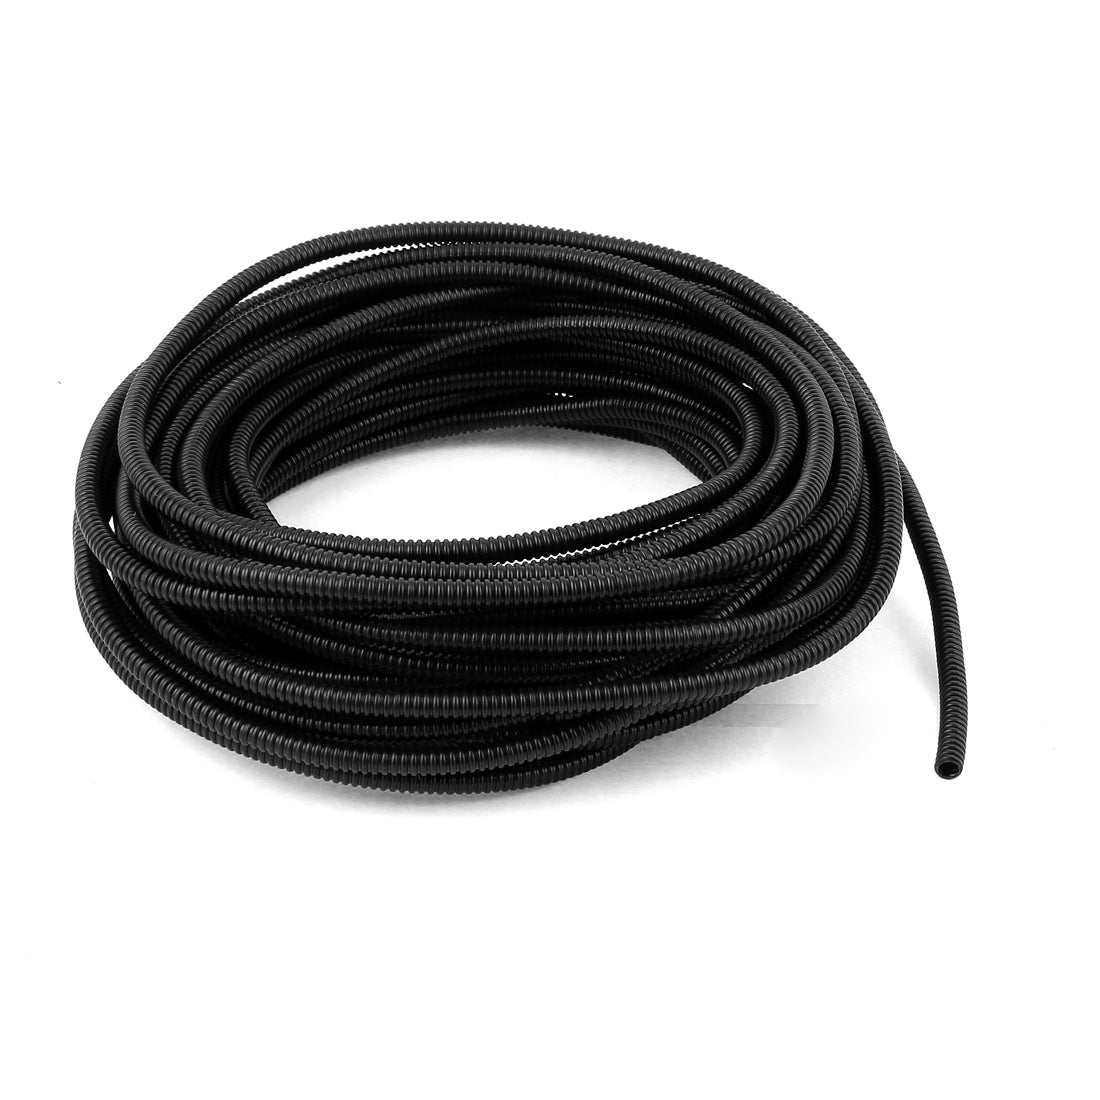 uxcell Uxcell 16 M 5 x 7 mm Plastic Flexible Corrugated Conduit Tube for Garden,Office Black